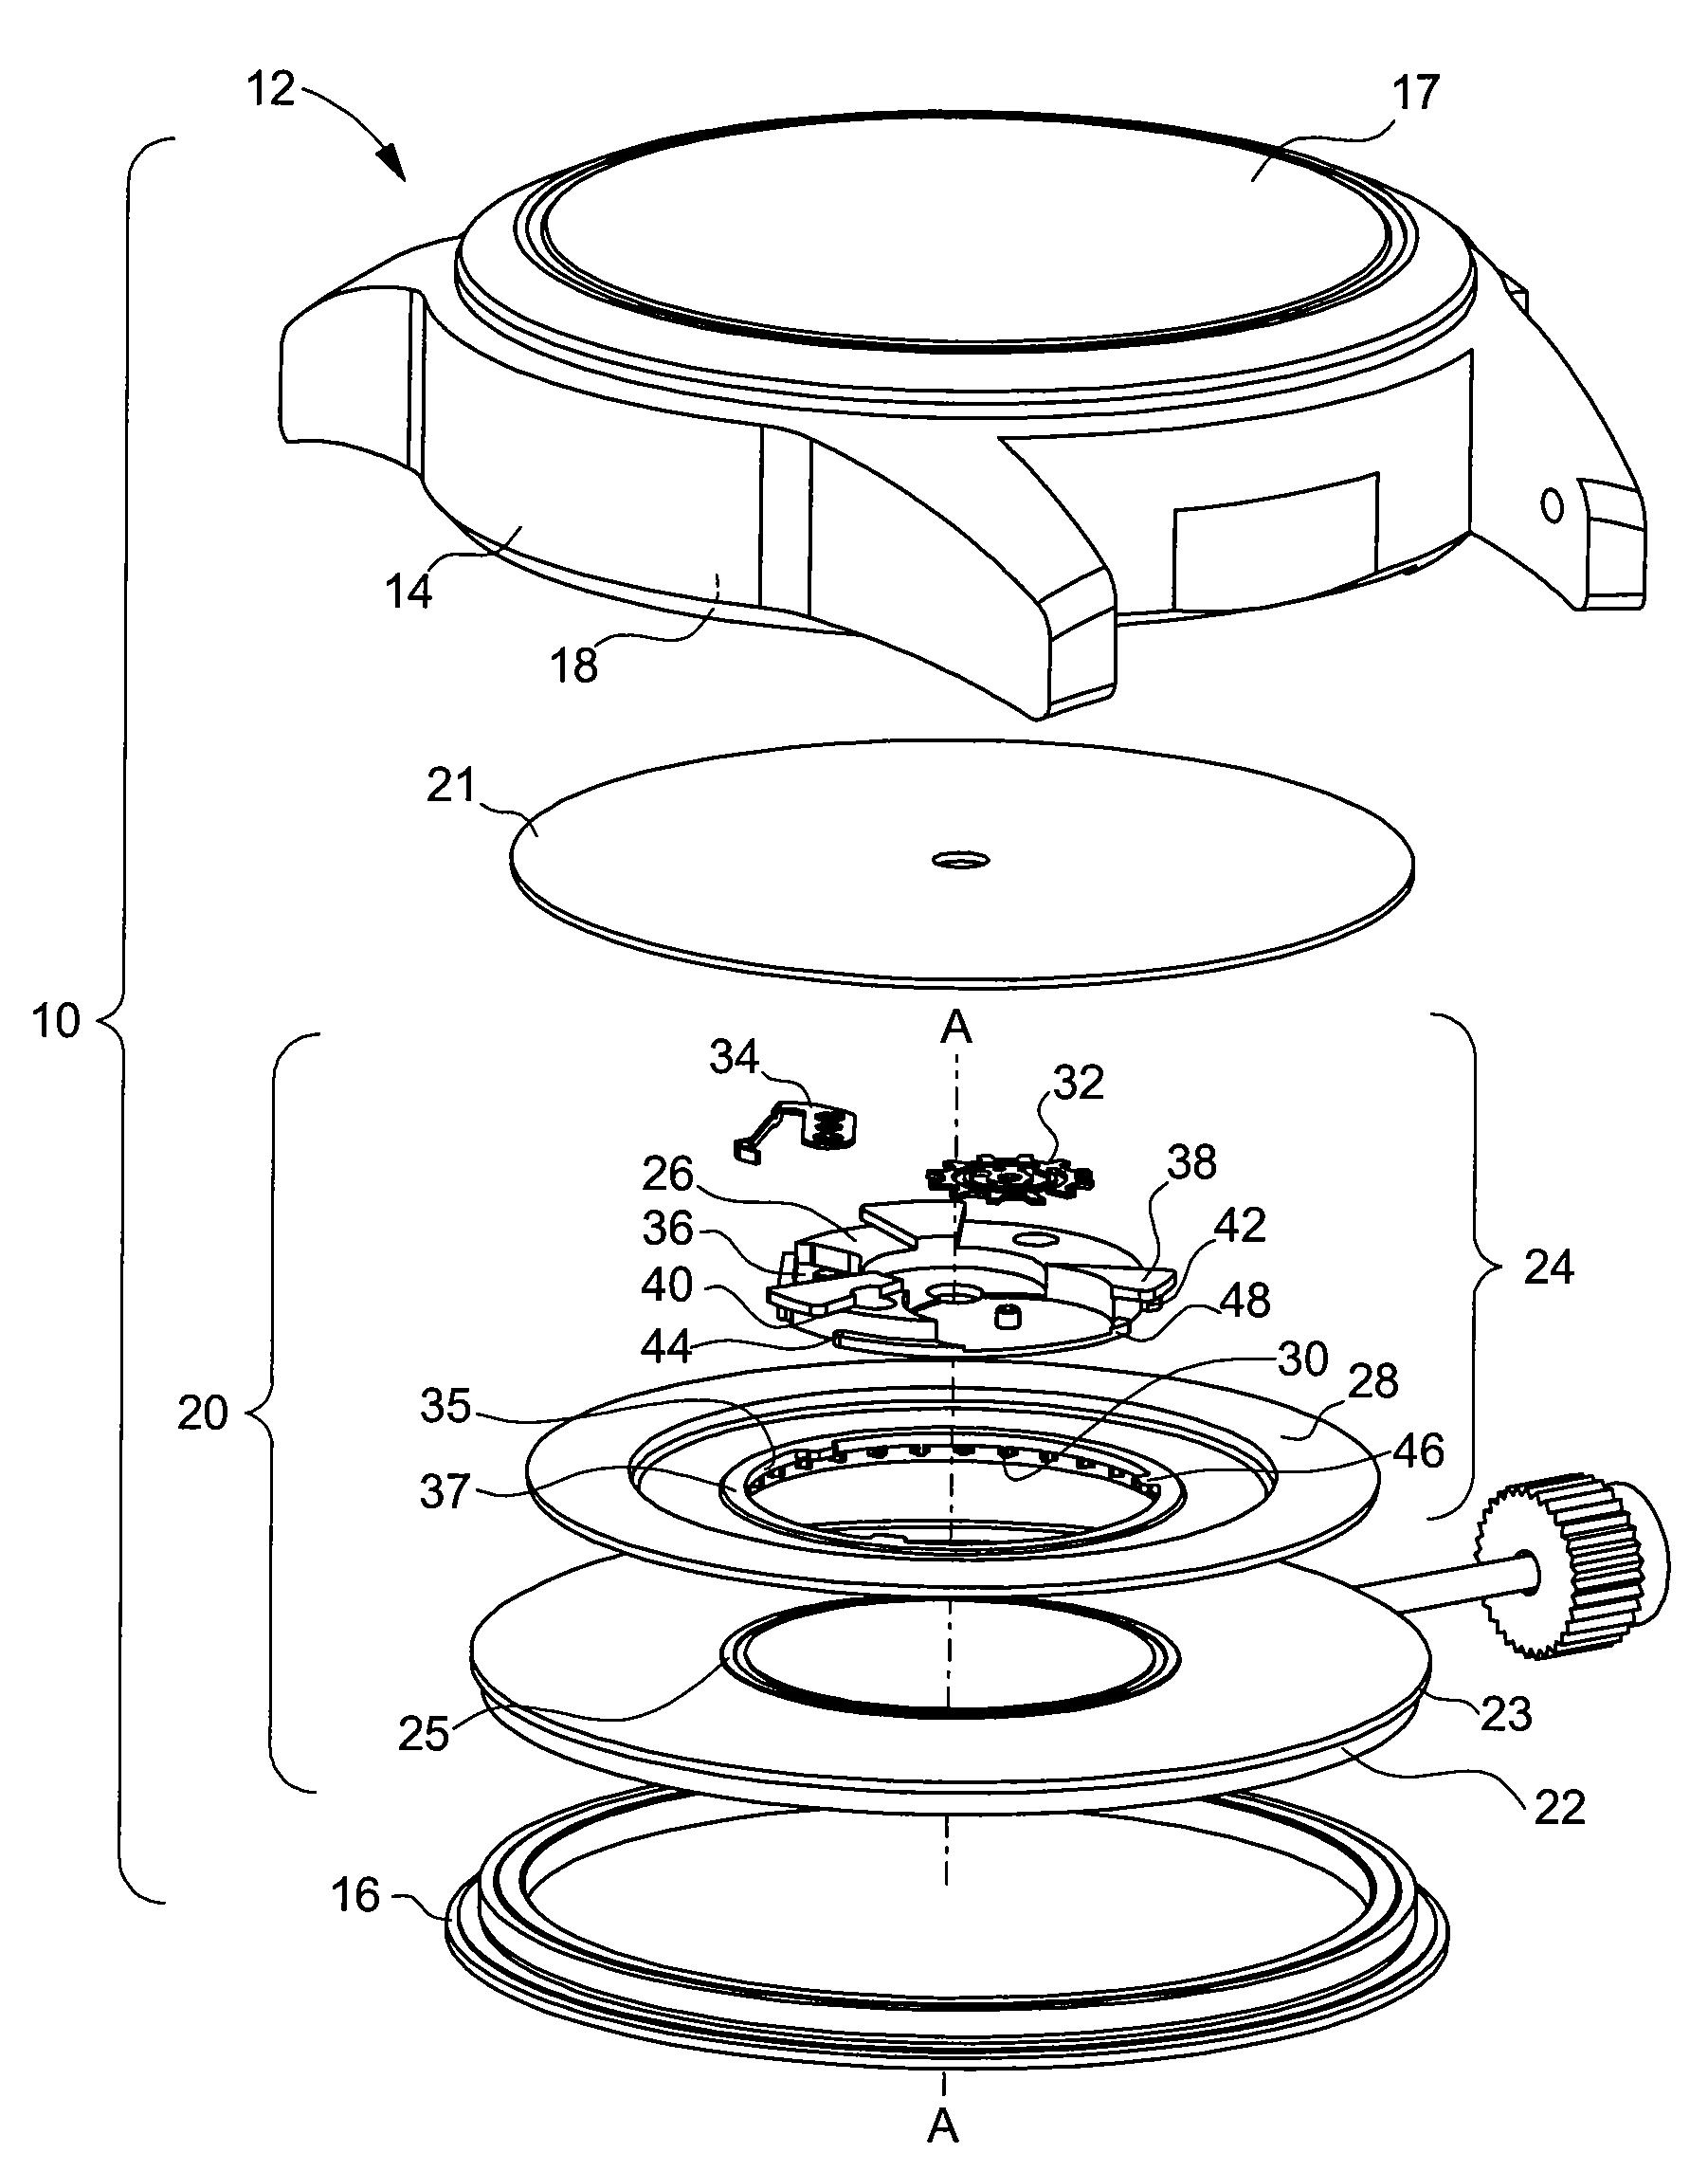 Timepiece movement fitted with a display module